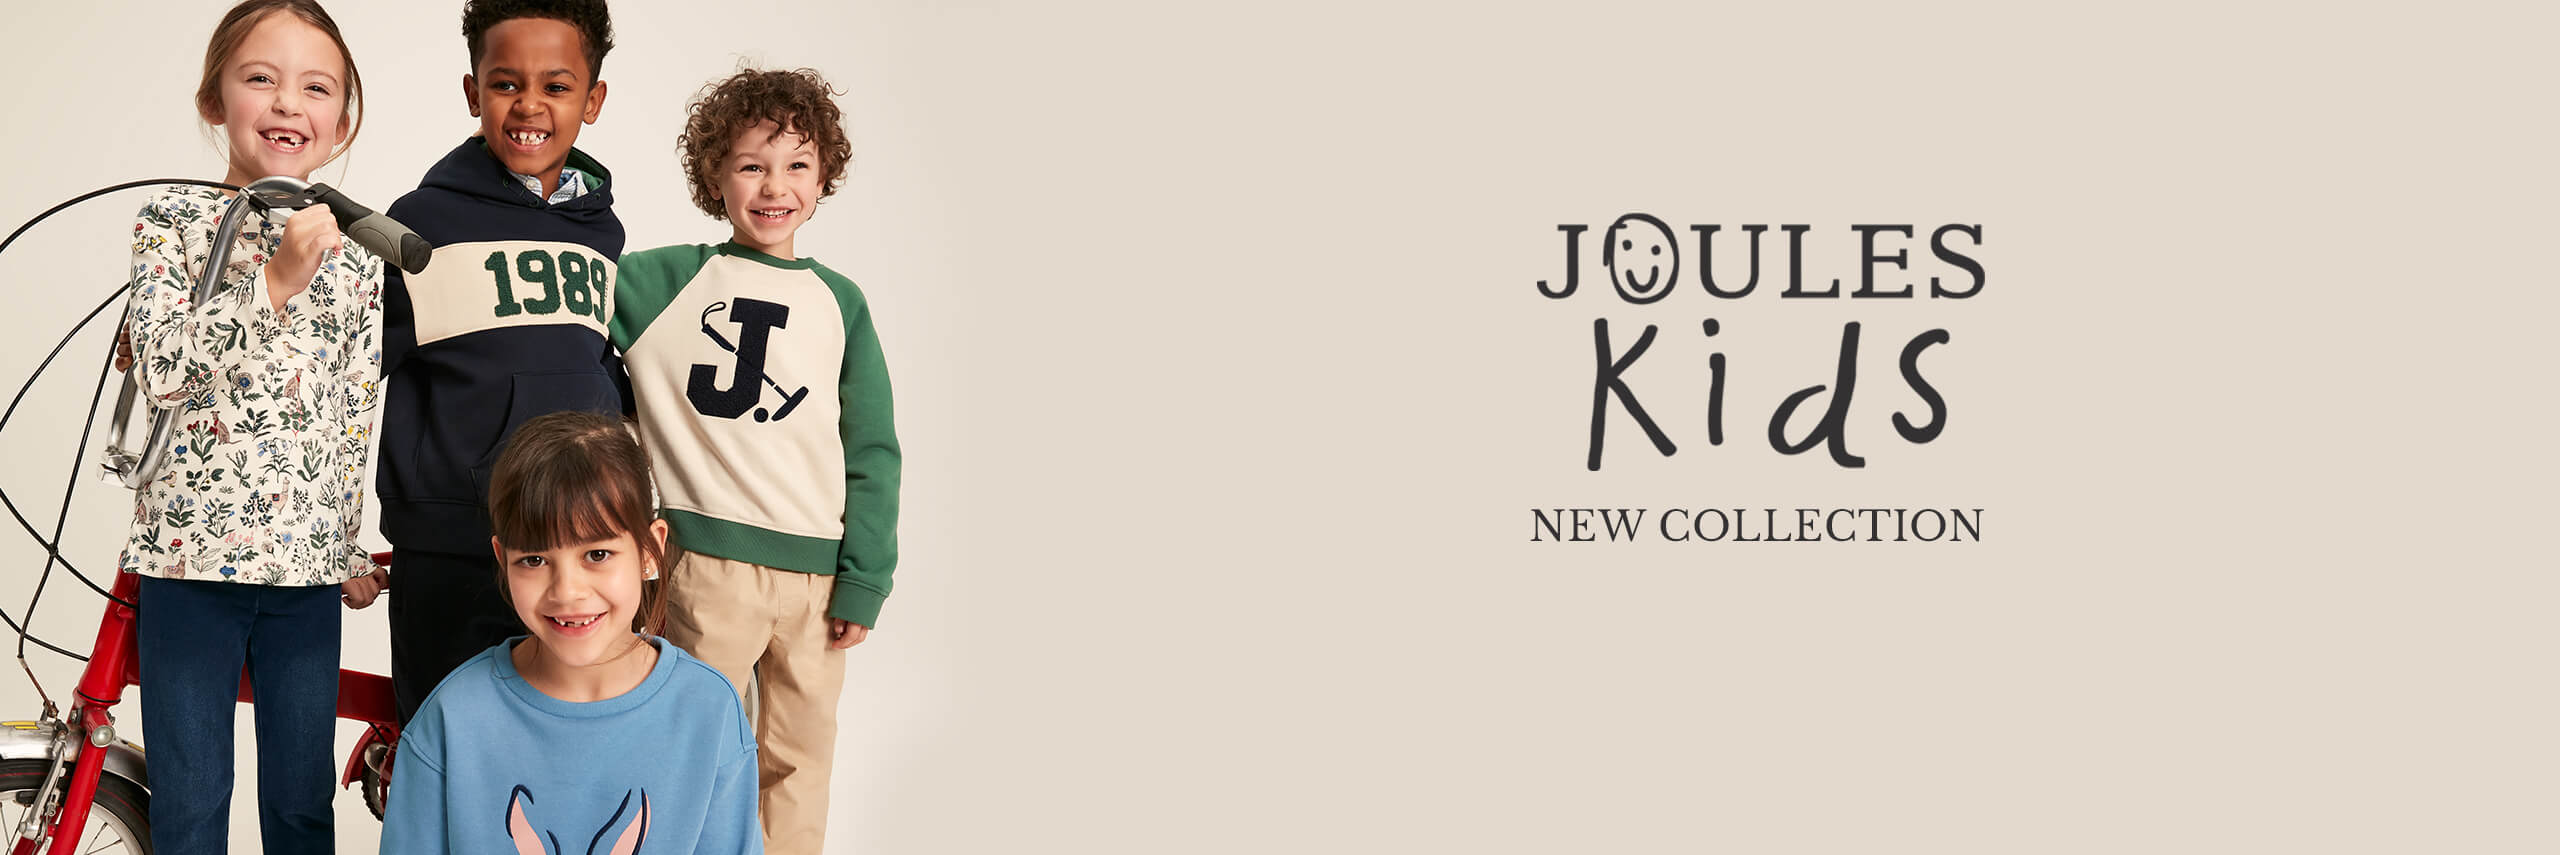 Joules Kids New Collection